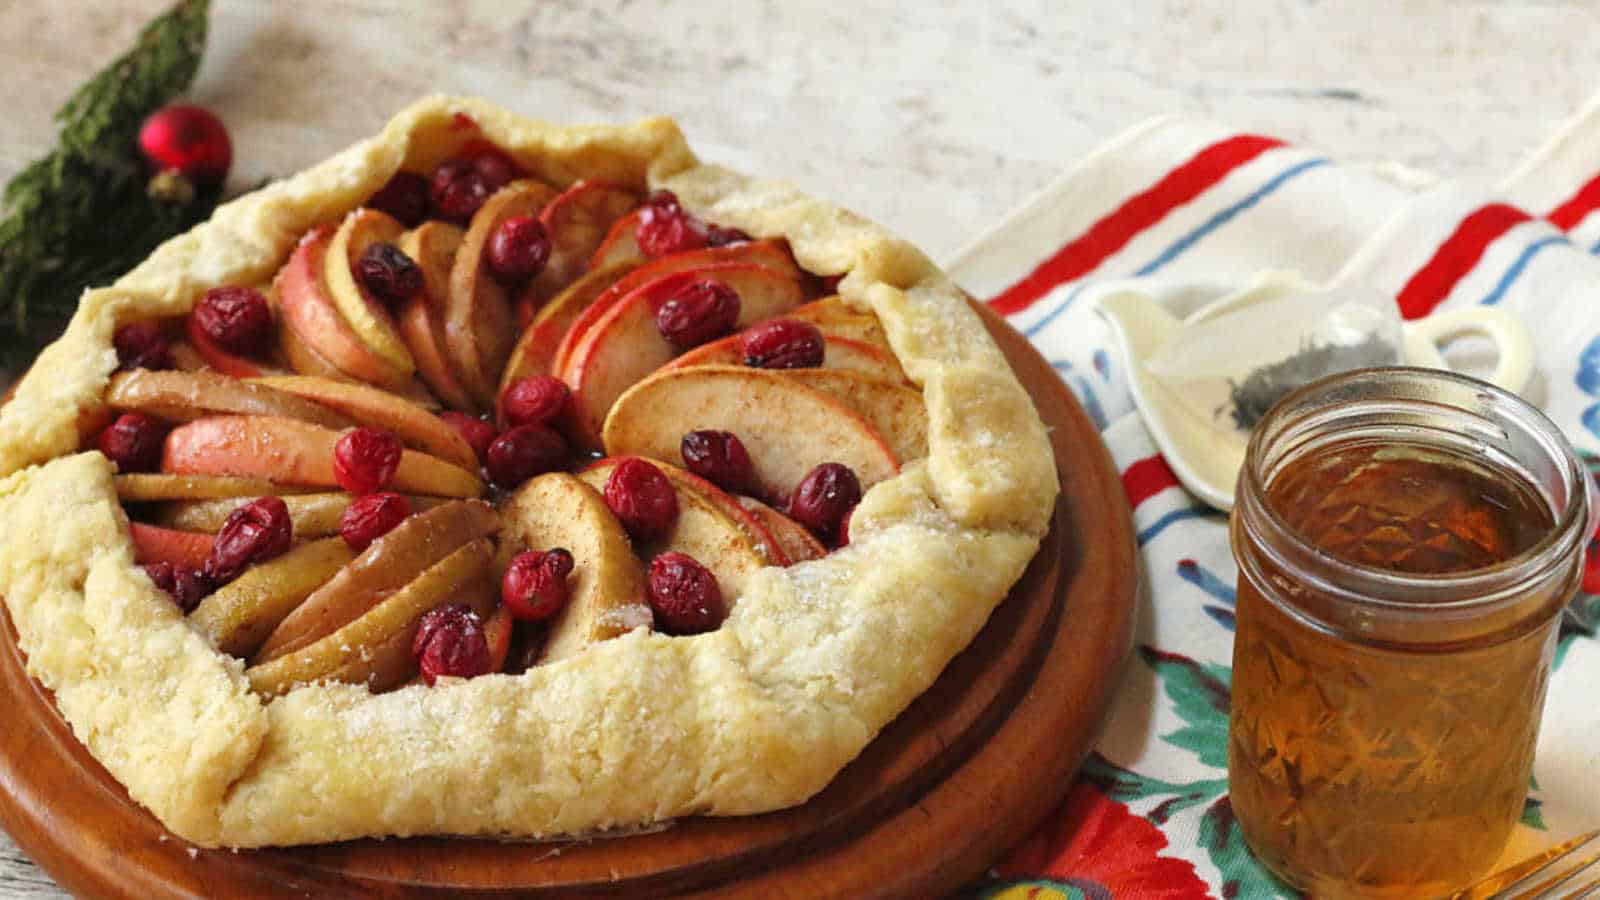 Apple cranberry galette on a wood board with a cup of tea.